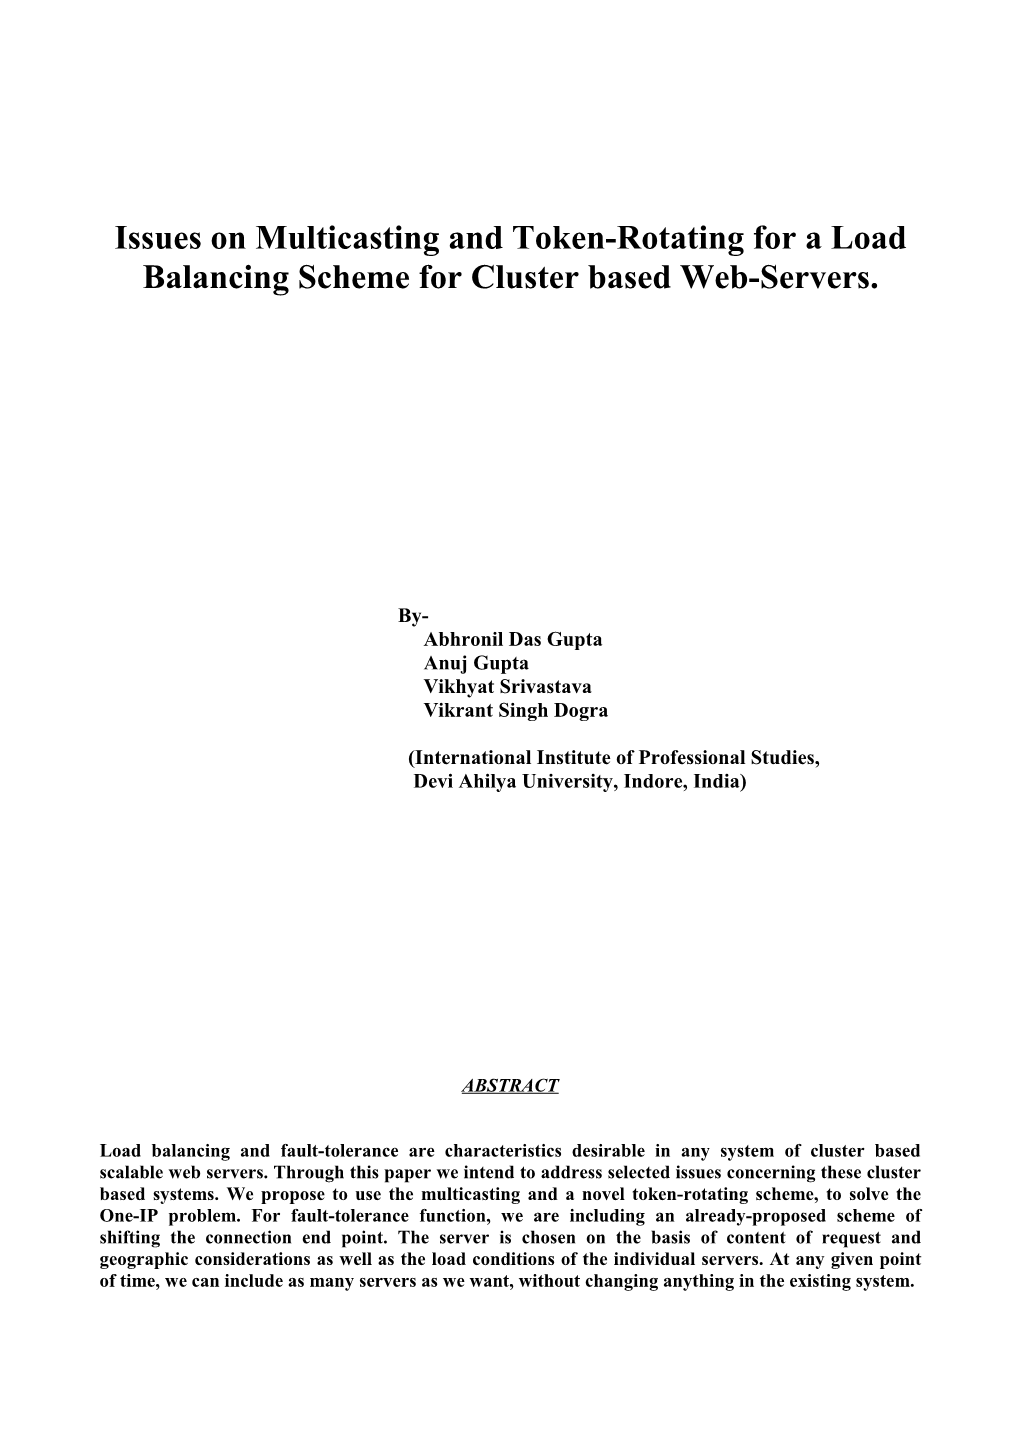 Issues on Multicasting and Token-Rotating for a Load Balancing Scheme for Cluster Based